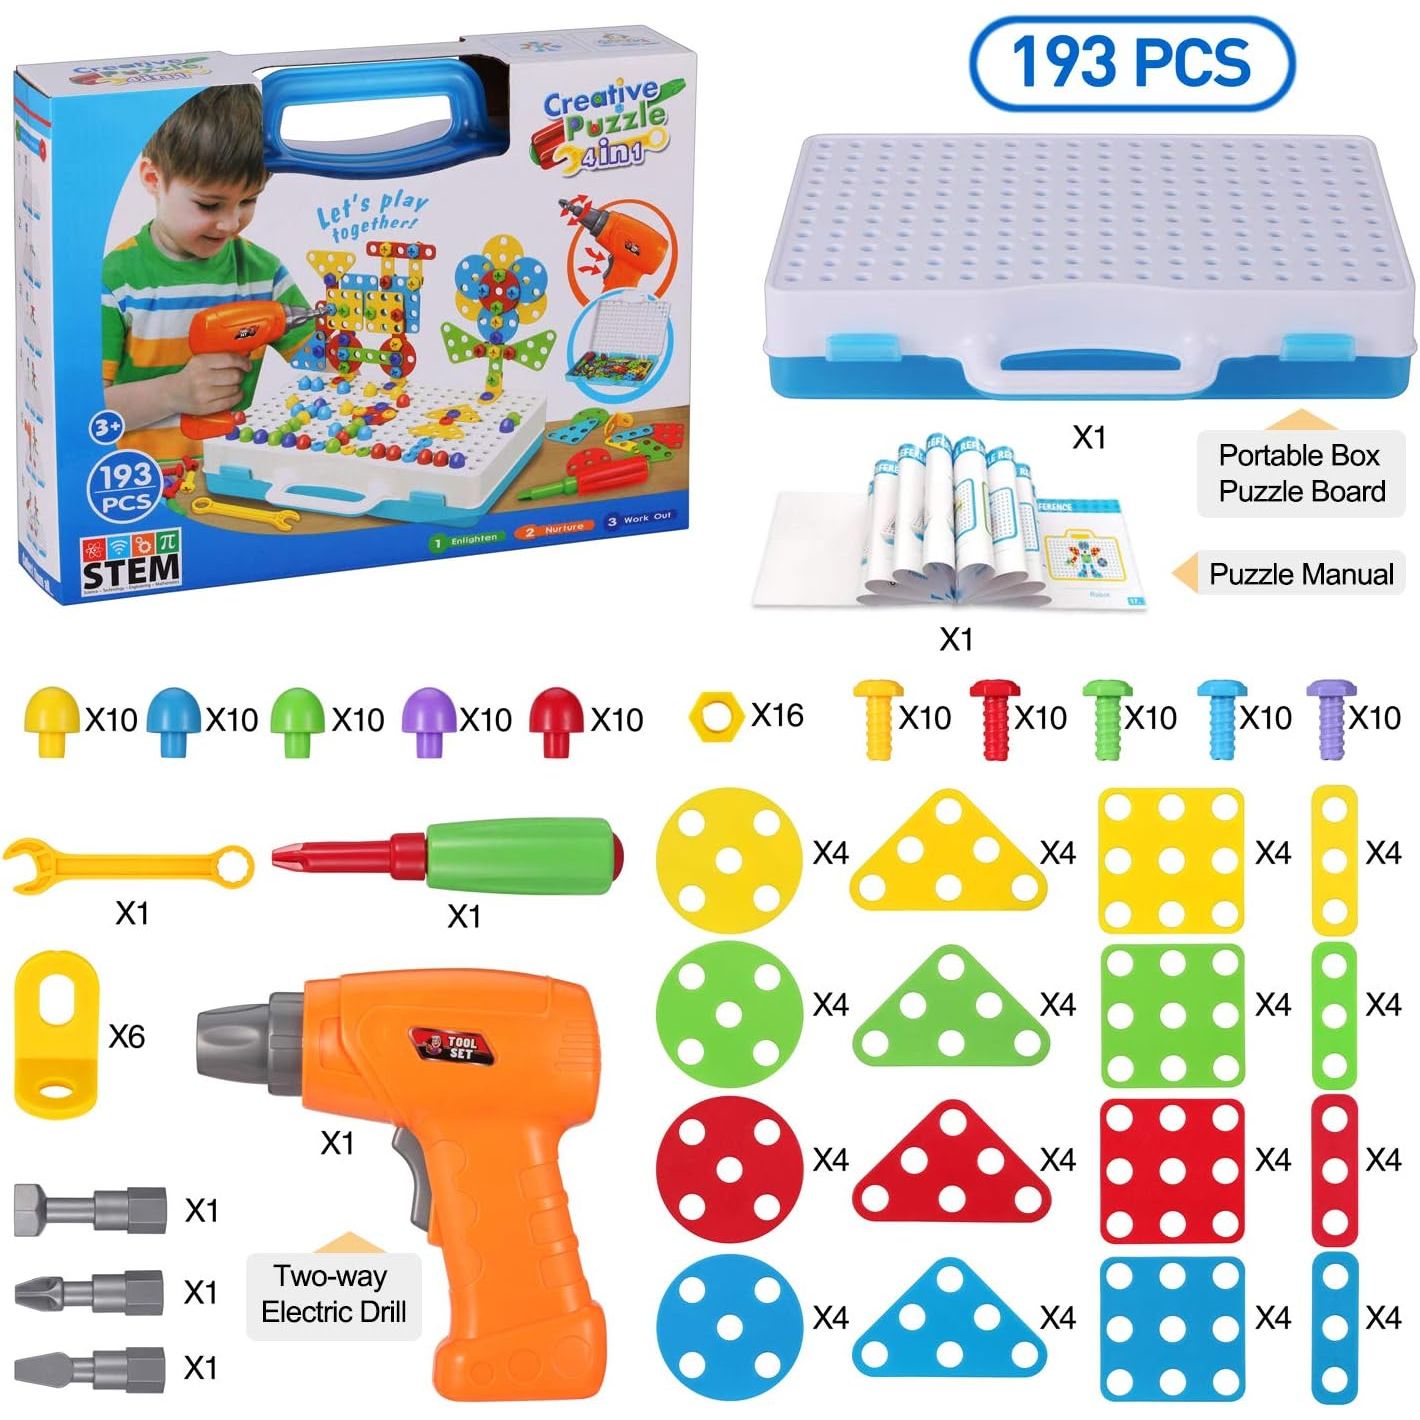 STEM Magnetic Creative Puzzle 4in1 | 193 Pcs Puzzle Briefcase Toy